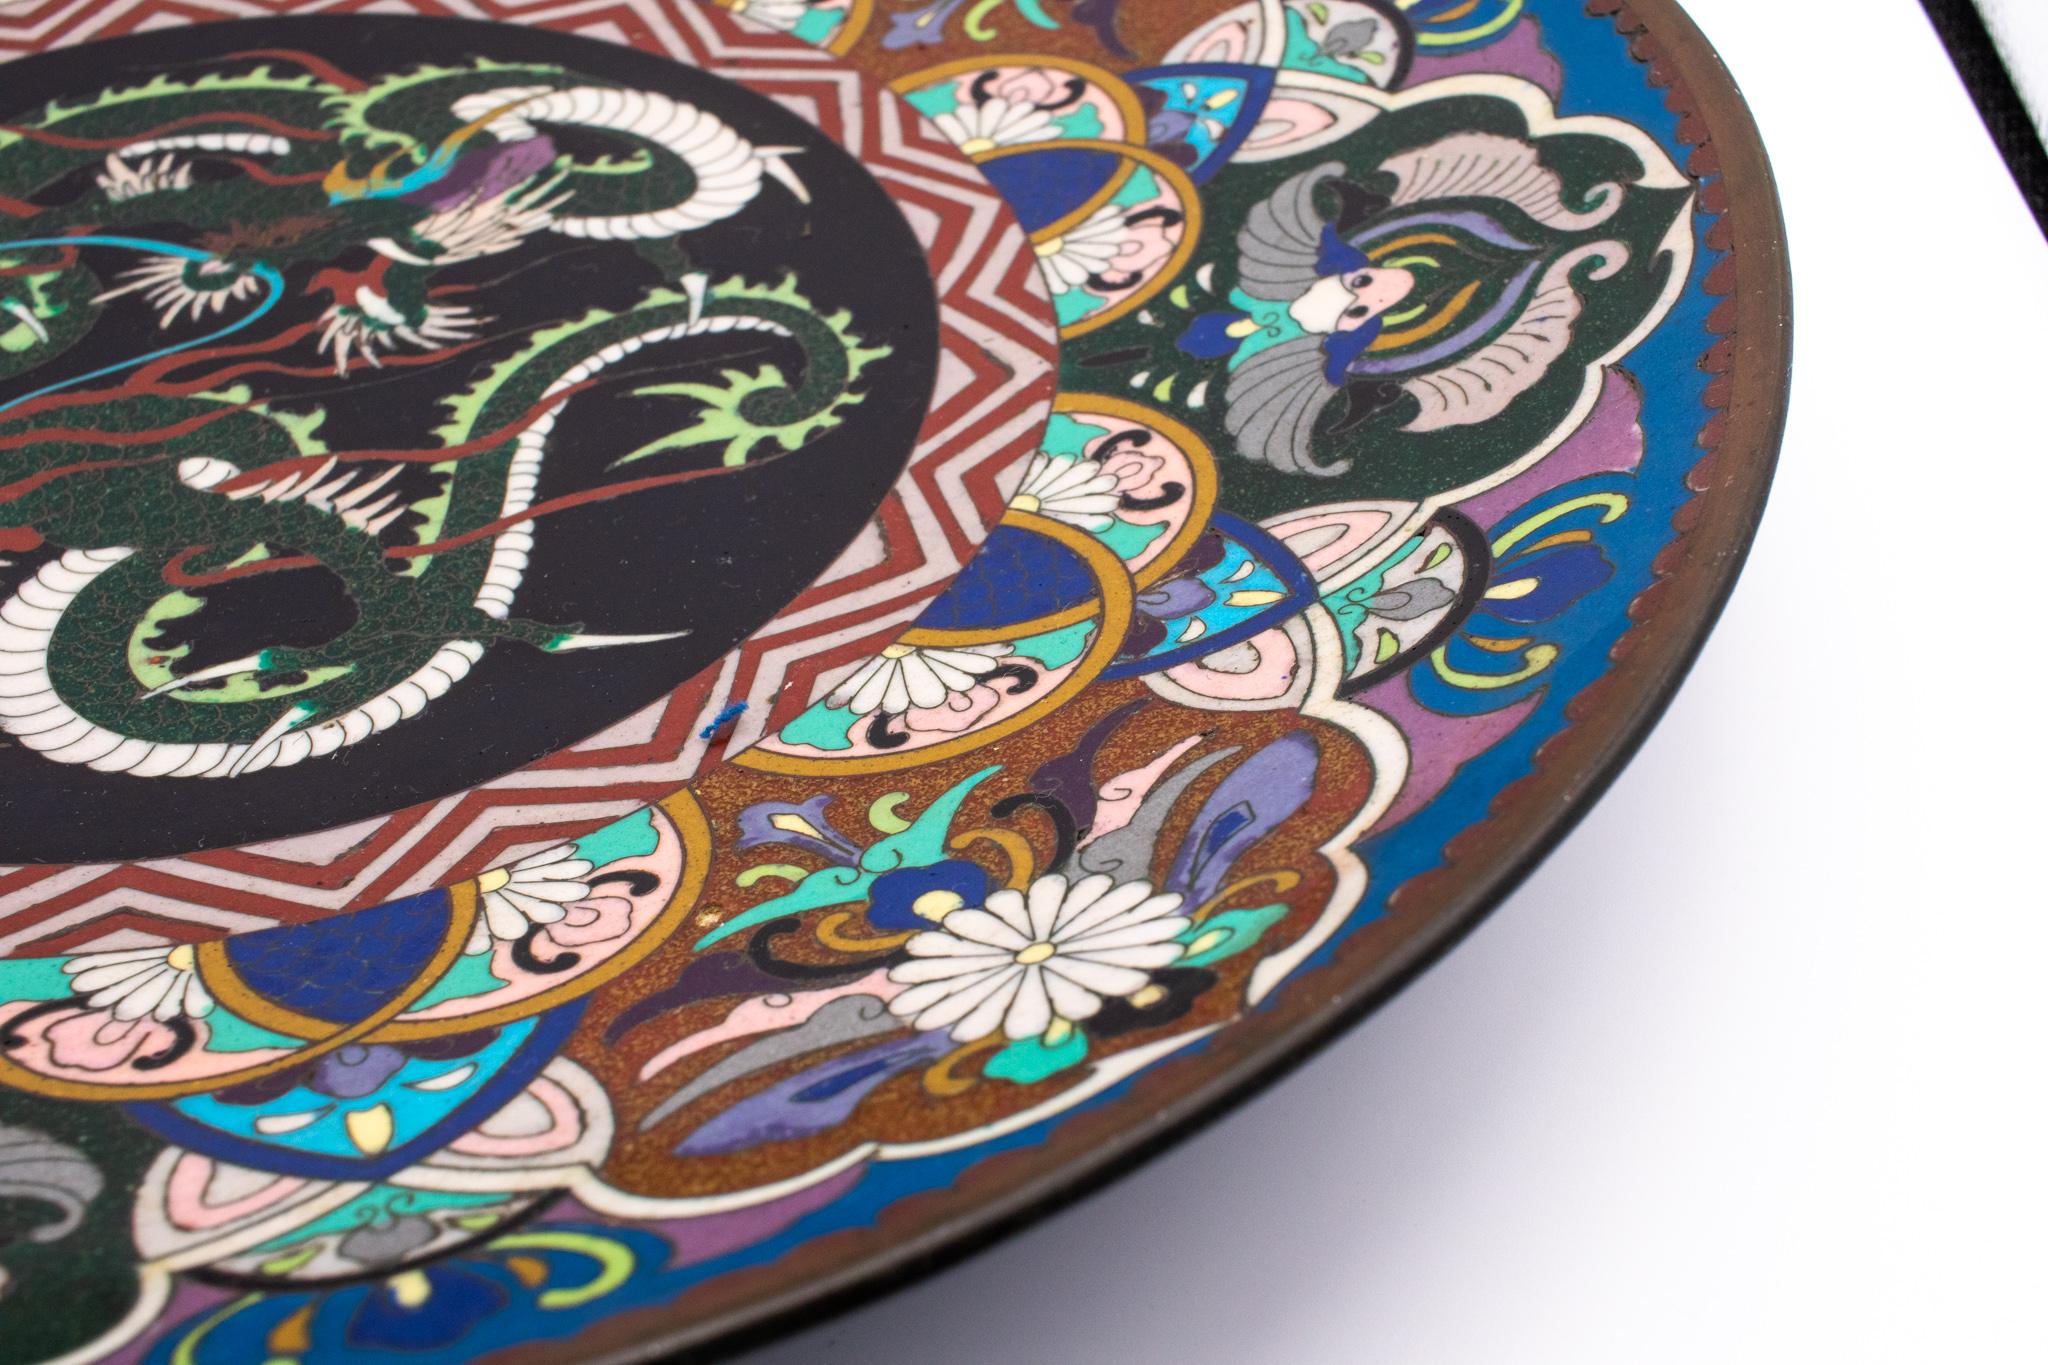 Japanese Japan 1900 Meiji Period Charger With A Dragon In Cloisonné Multicolor Enamel For Sale